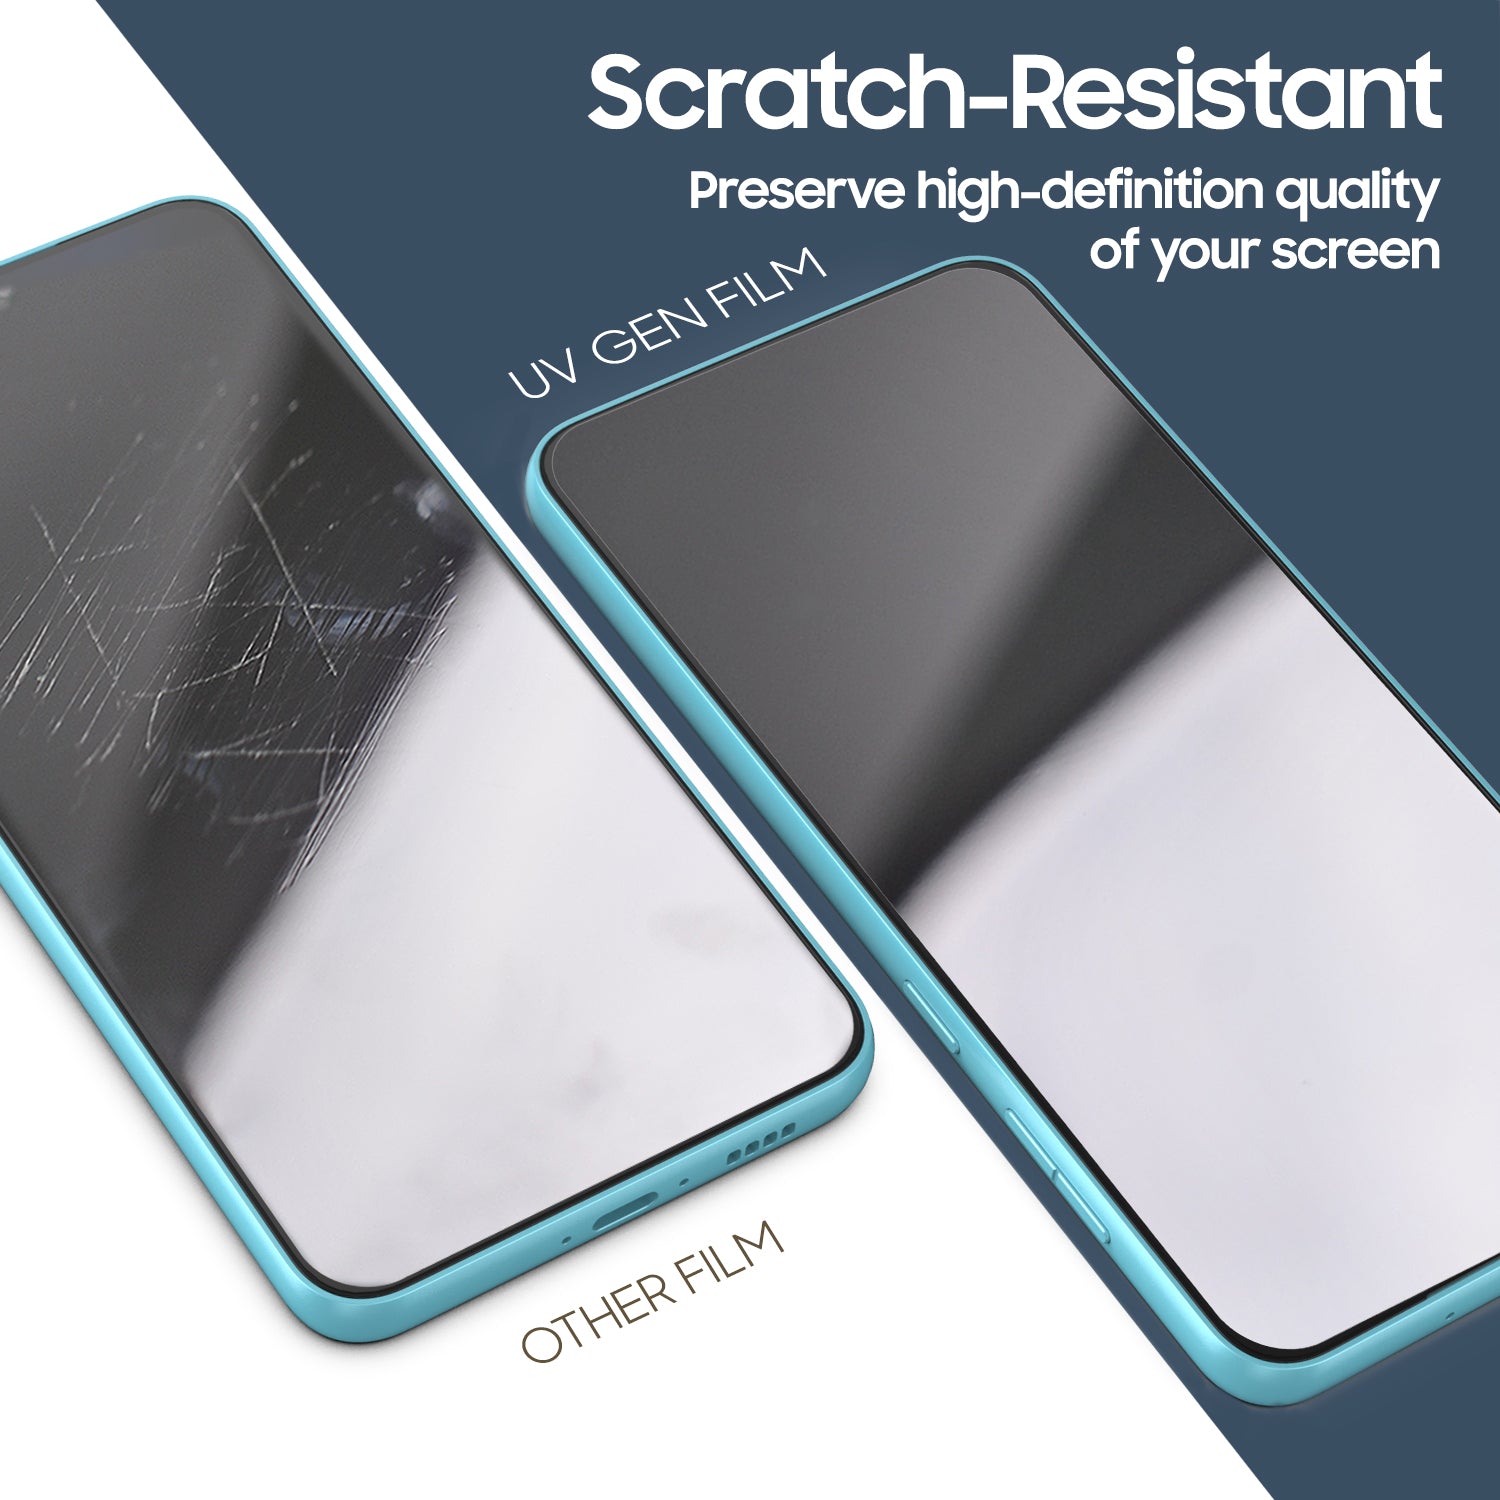 Wholesale Price IPhone 8 High Definition Clear Back Tempered Glass Screen  Protector Shield,IPhone 8 High Definition Clear Back Tempered Glass Screen  Protector Shield For Sale